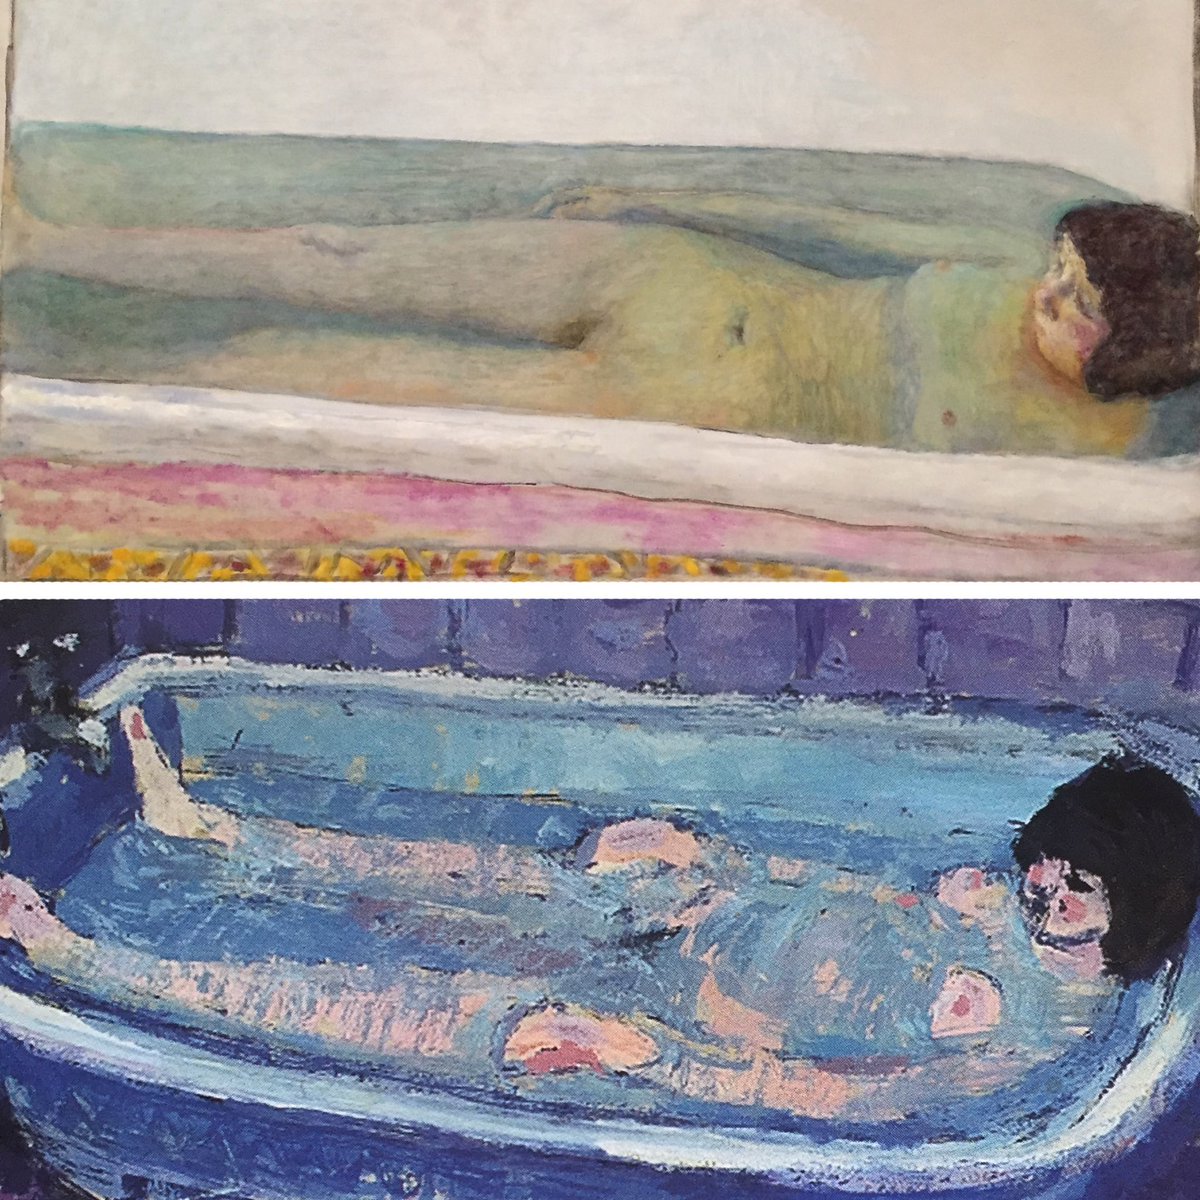 Top: “Bath: Baignoire (Le Bain)” by Pierre Bonnard [detail], 1925, oil on canvas. Below: “Untitled (girl in bath)” by Pauline Boty [detail], c.1957, watercolour on paper. . Composition by paulineboty.org